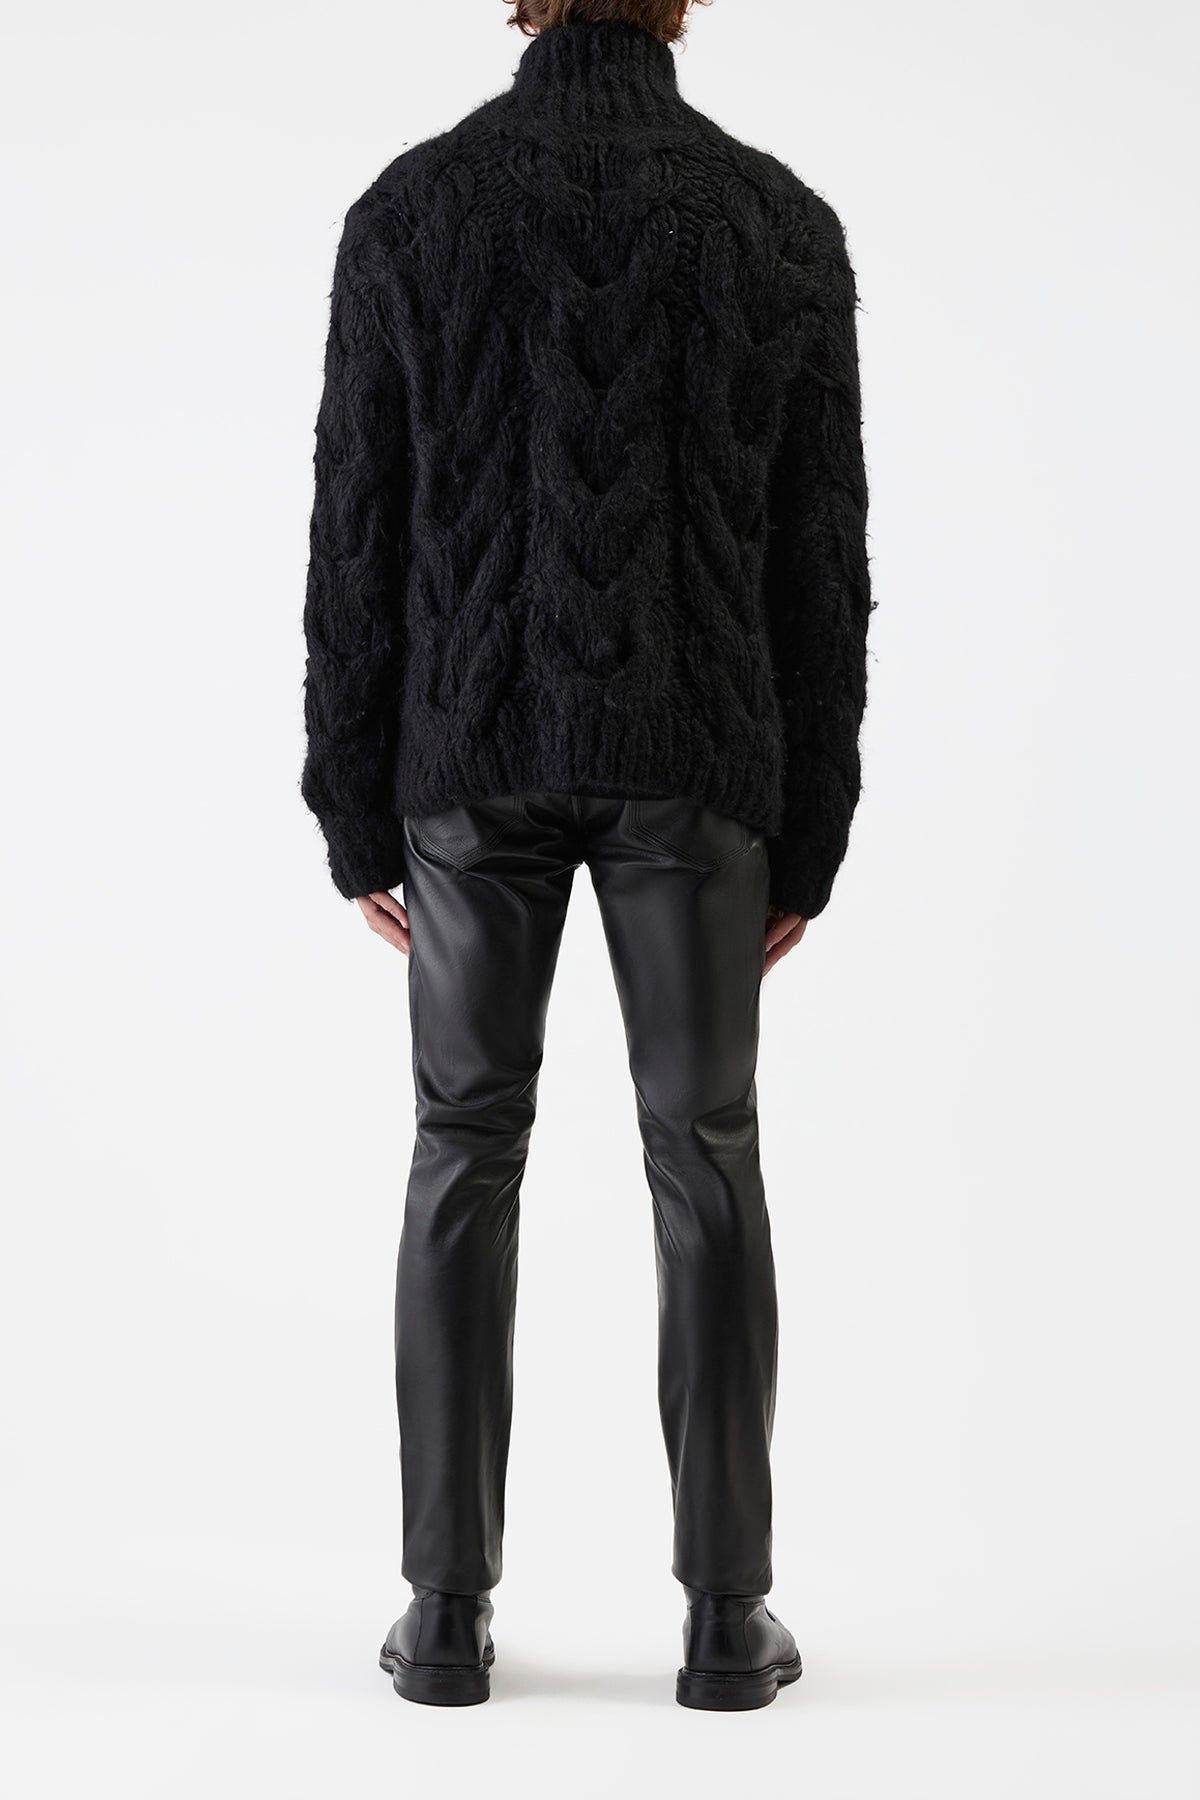 Ray Knit Sweater in Black Welfat Cashmere - 5